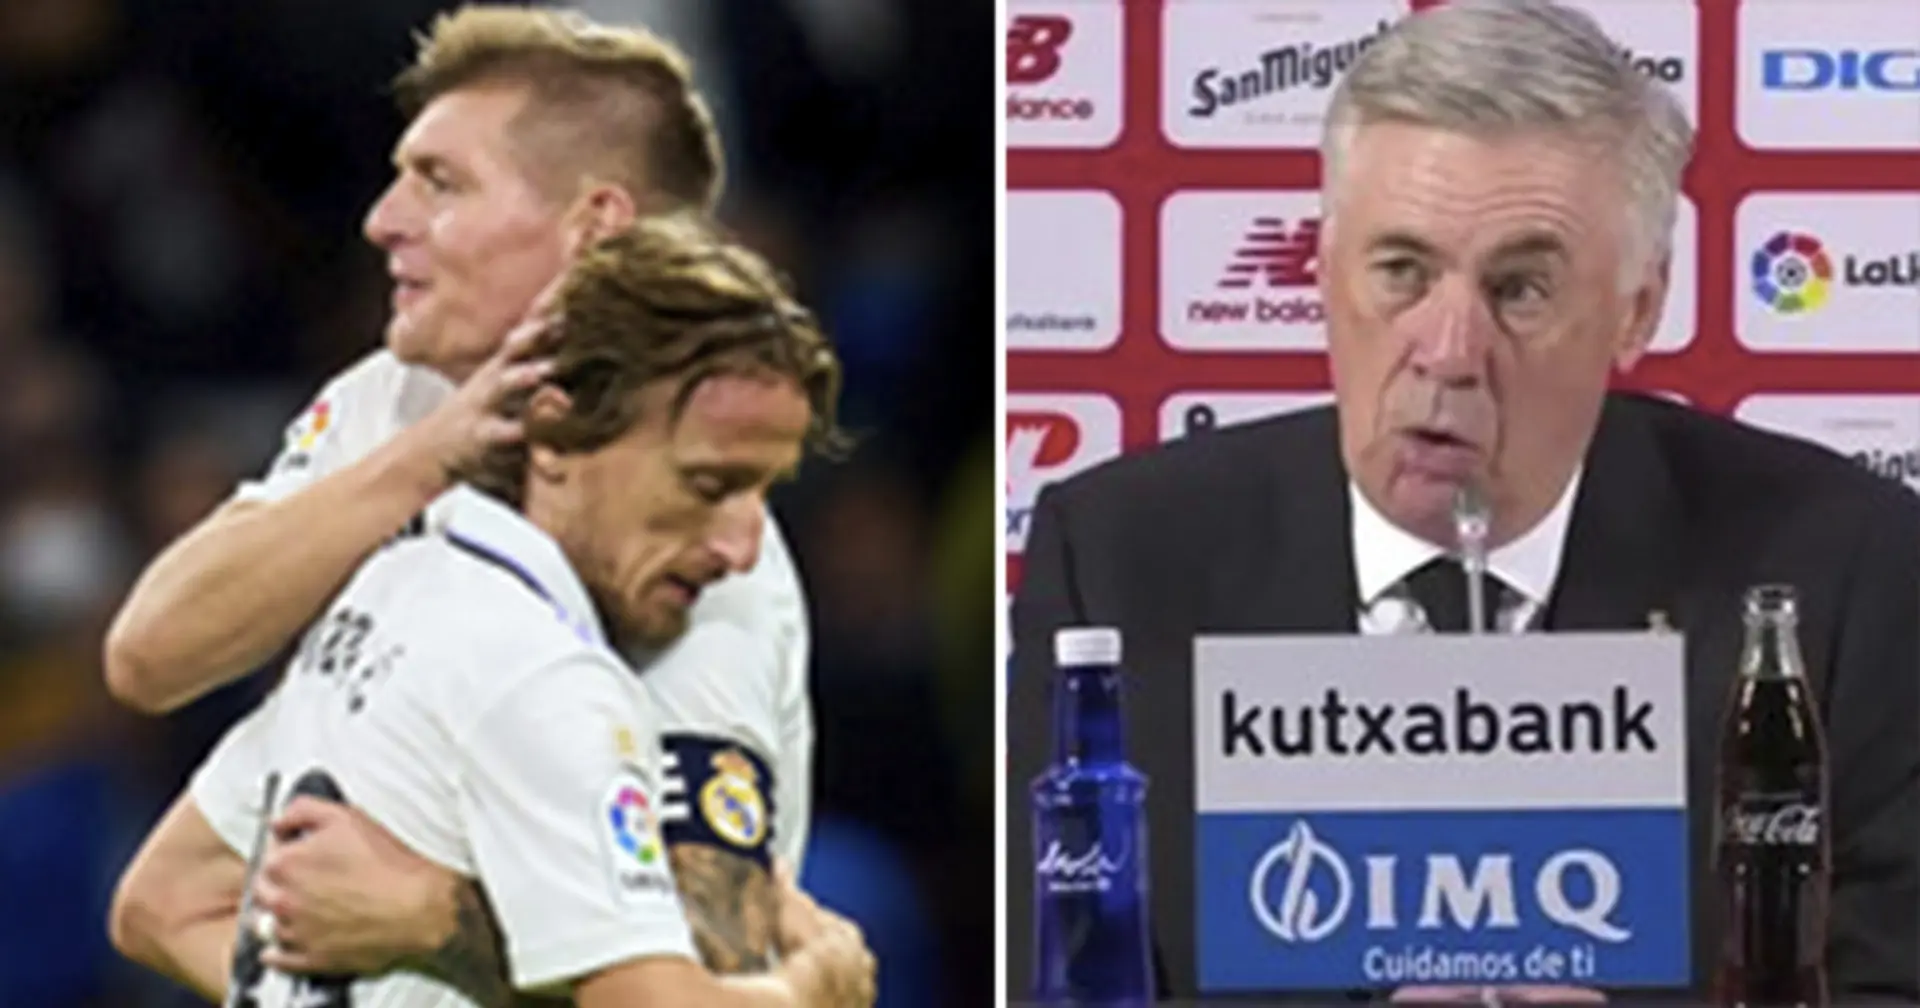 Not just for rest reasons: Ancelotti explains benching Kroos and Modric for Bilbao clash